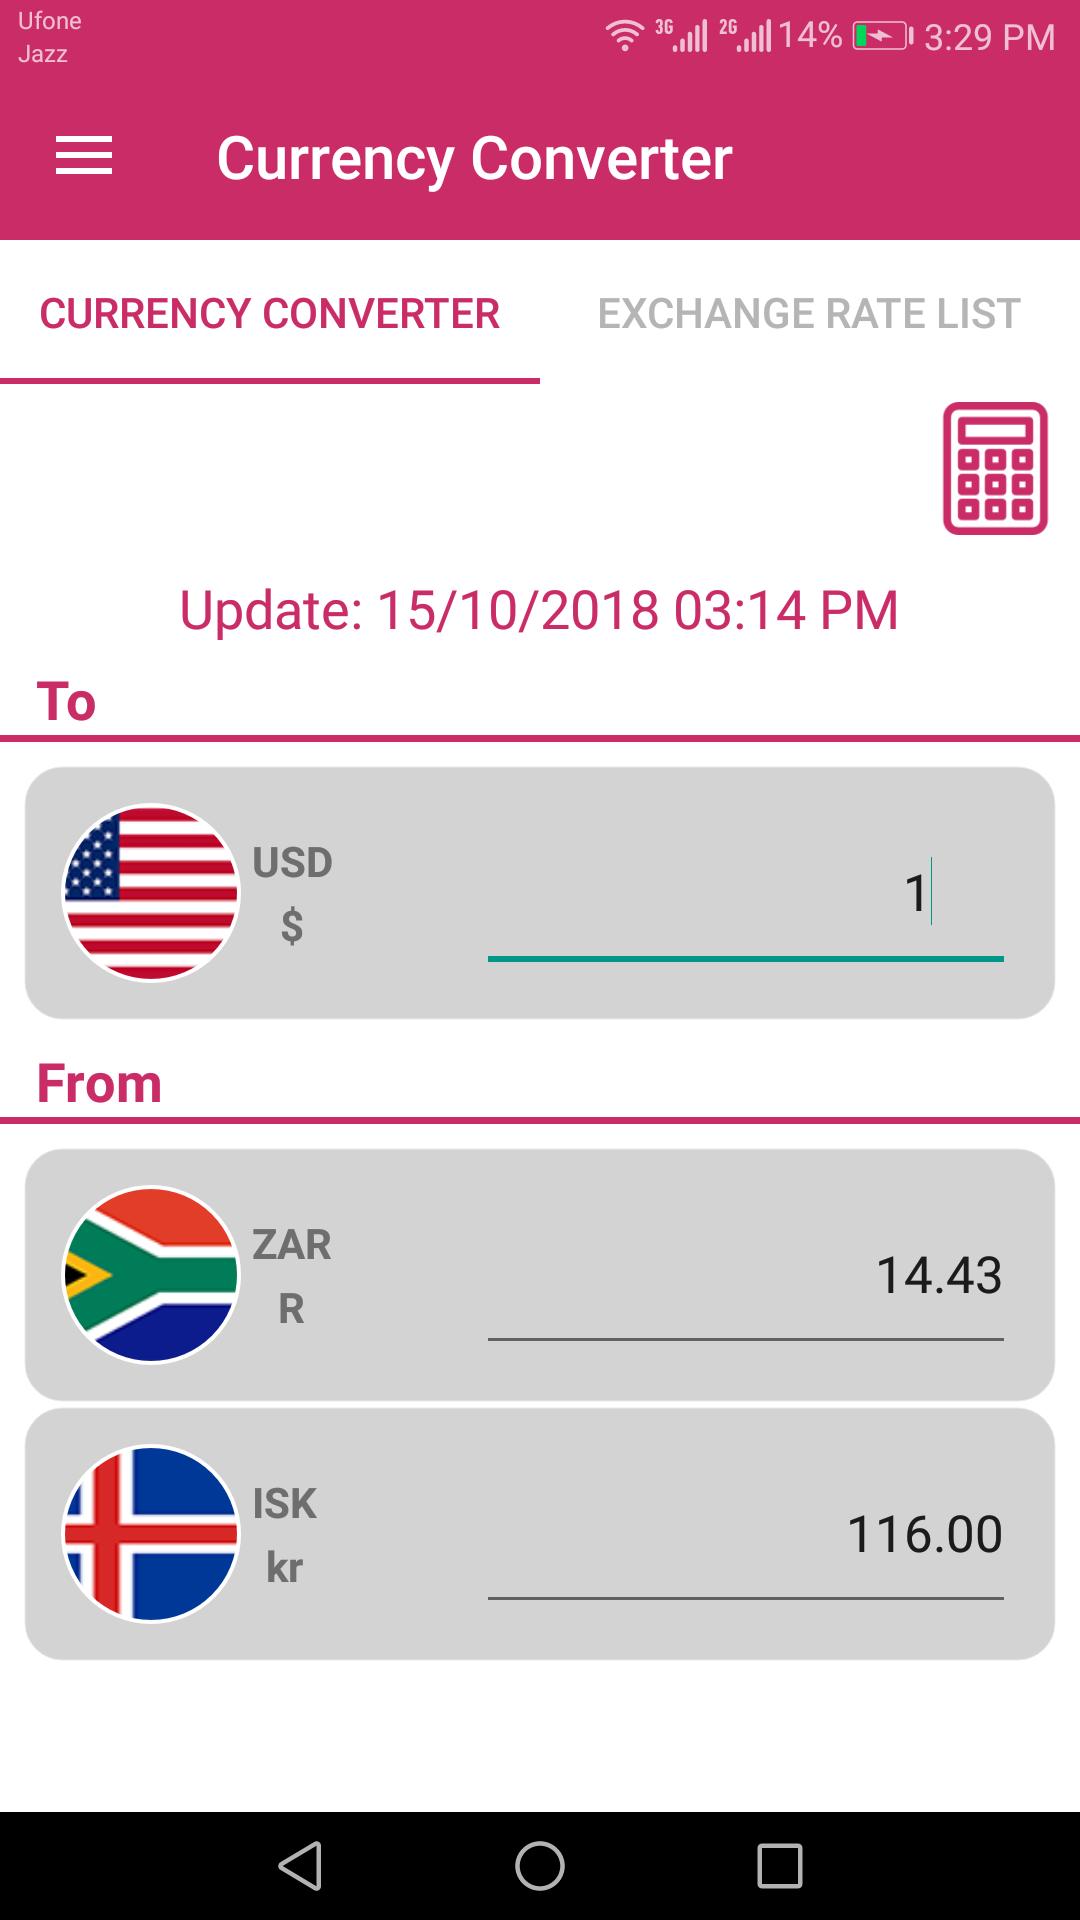 Us Dollar To South African Rand And Isk Converter For Android Apk Download - roblox currency converter